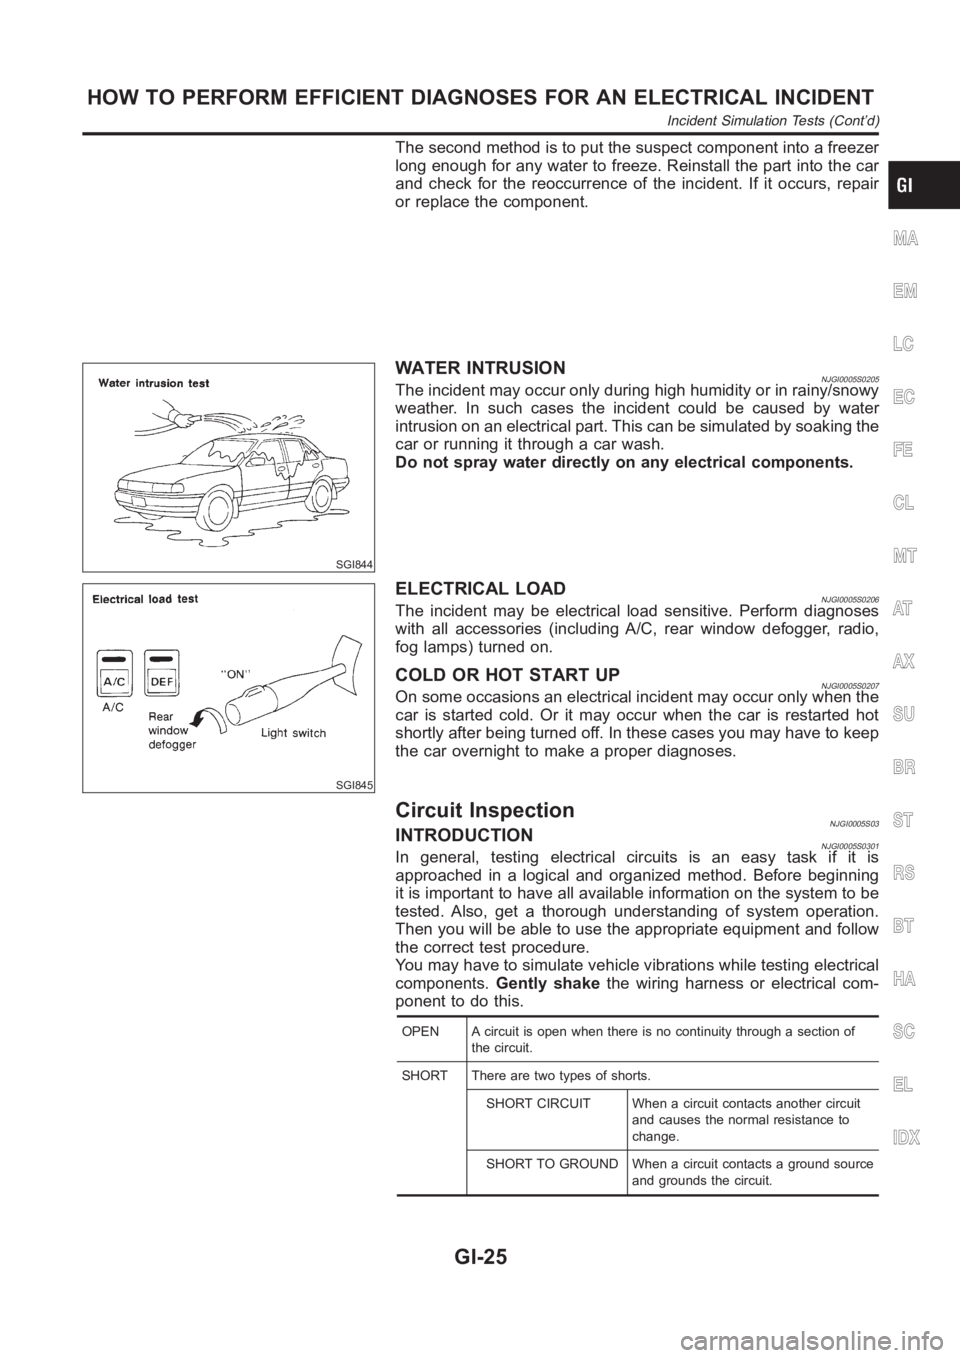 NISSAN ALMERA N16 2003  Electronic Owners Manual The second method is to put the suspect component into a freezer
long enough for any water to freeze. Reinstall the part into the car
and check for the reoccurrence of the incident. If it occurs, repa